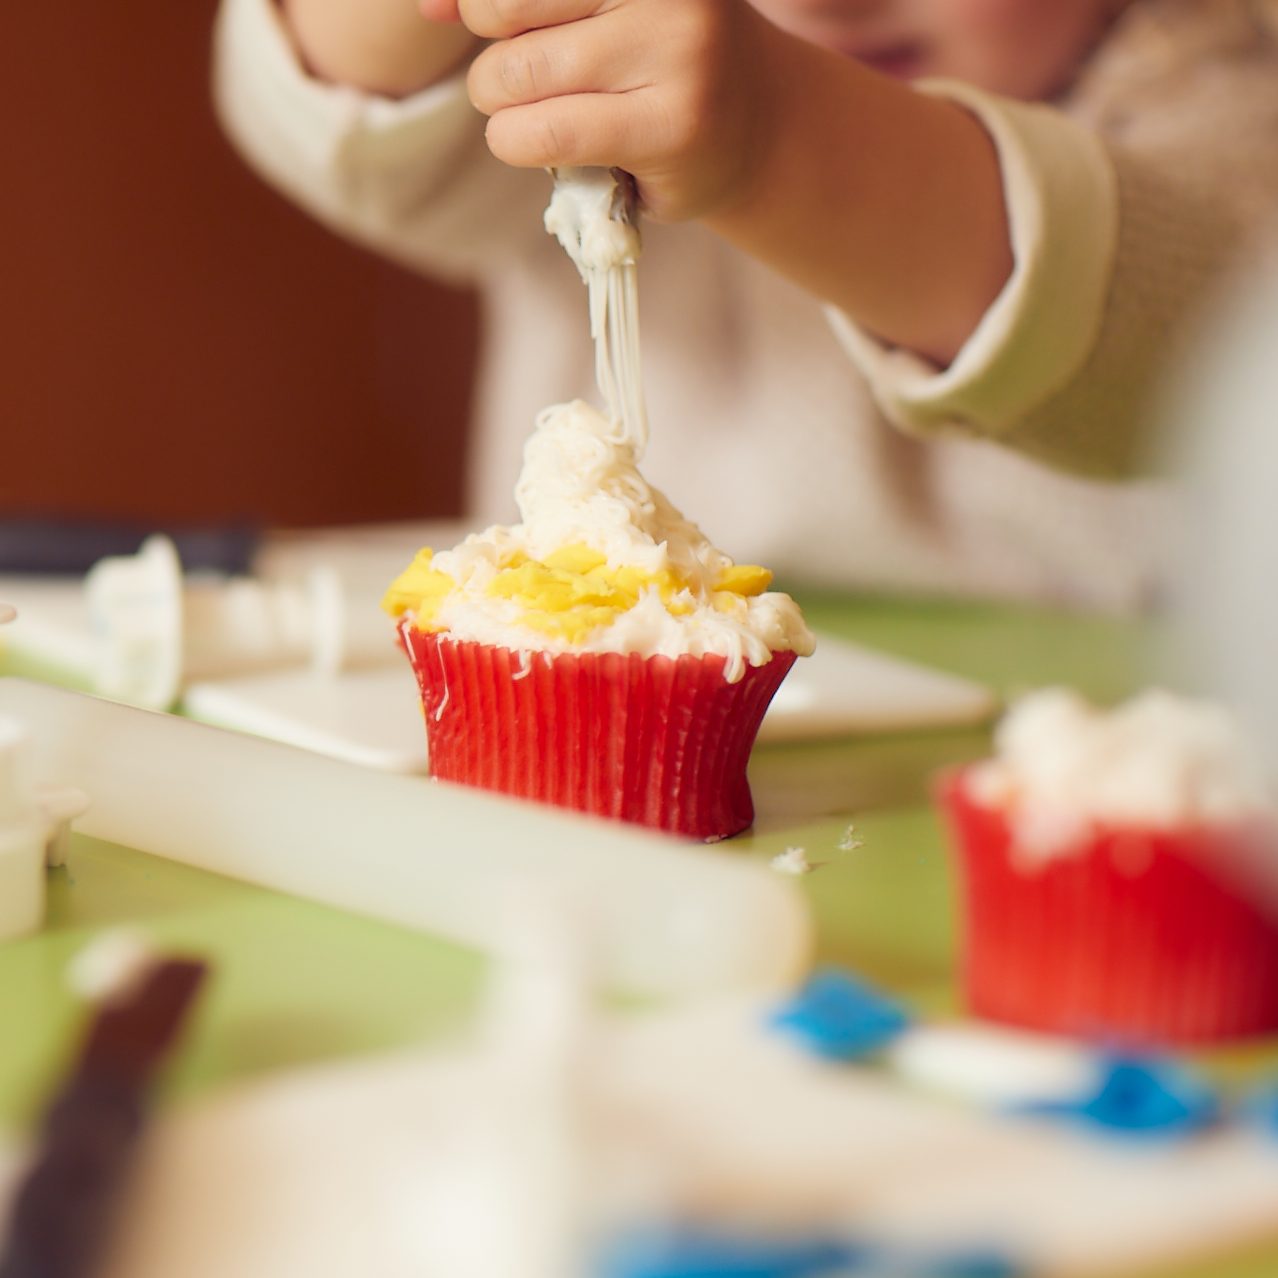 A little girl decorating a cupcake